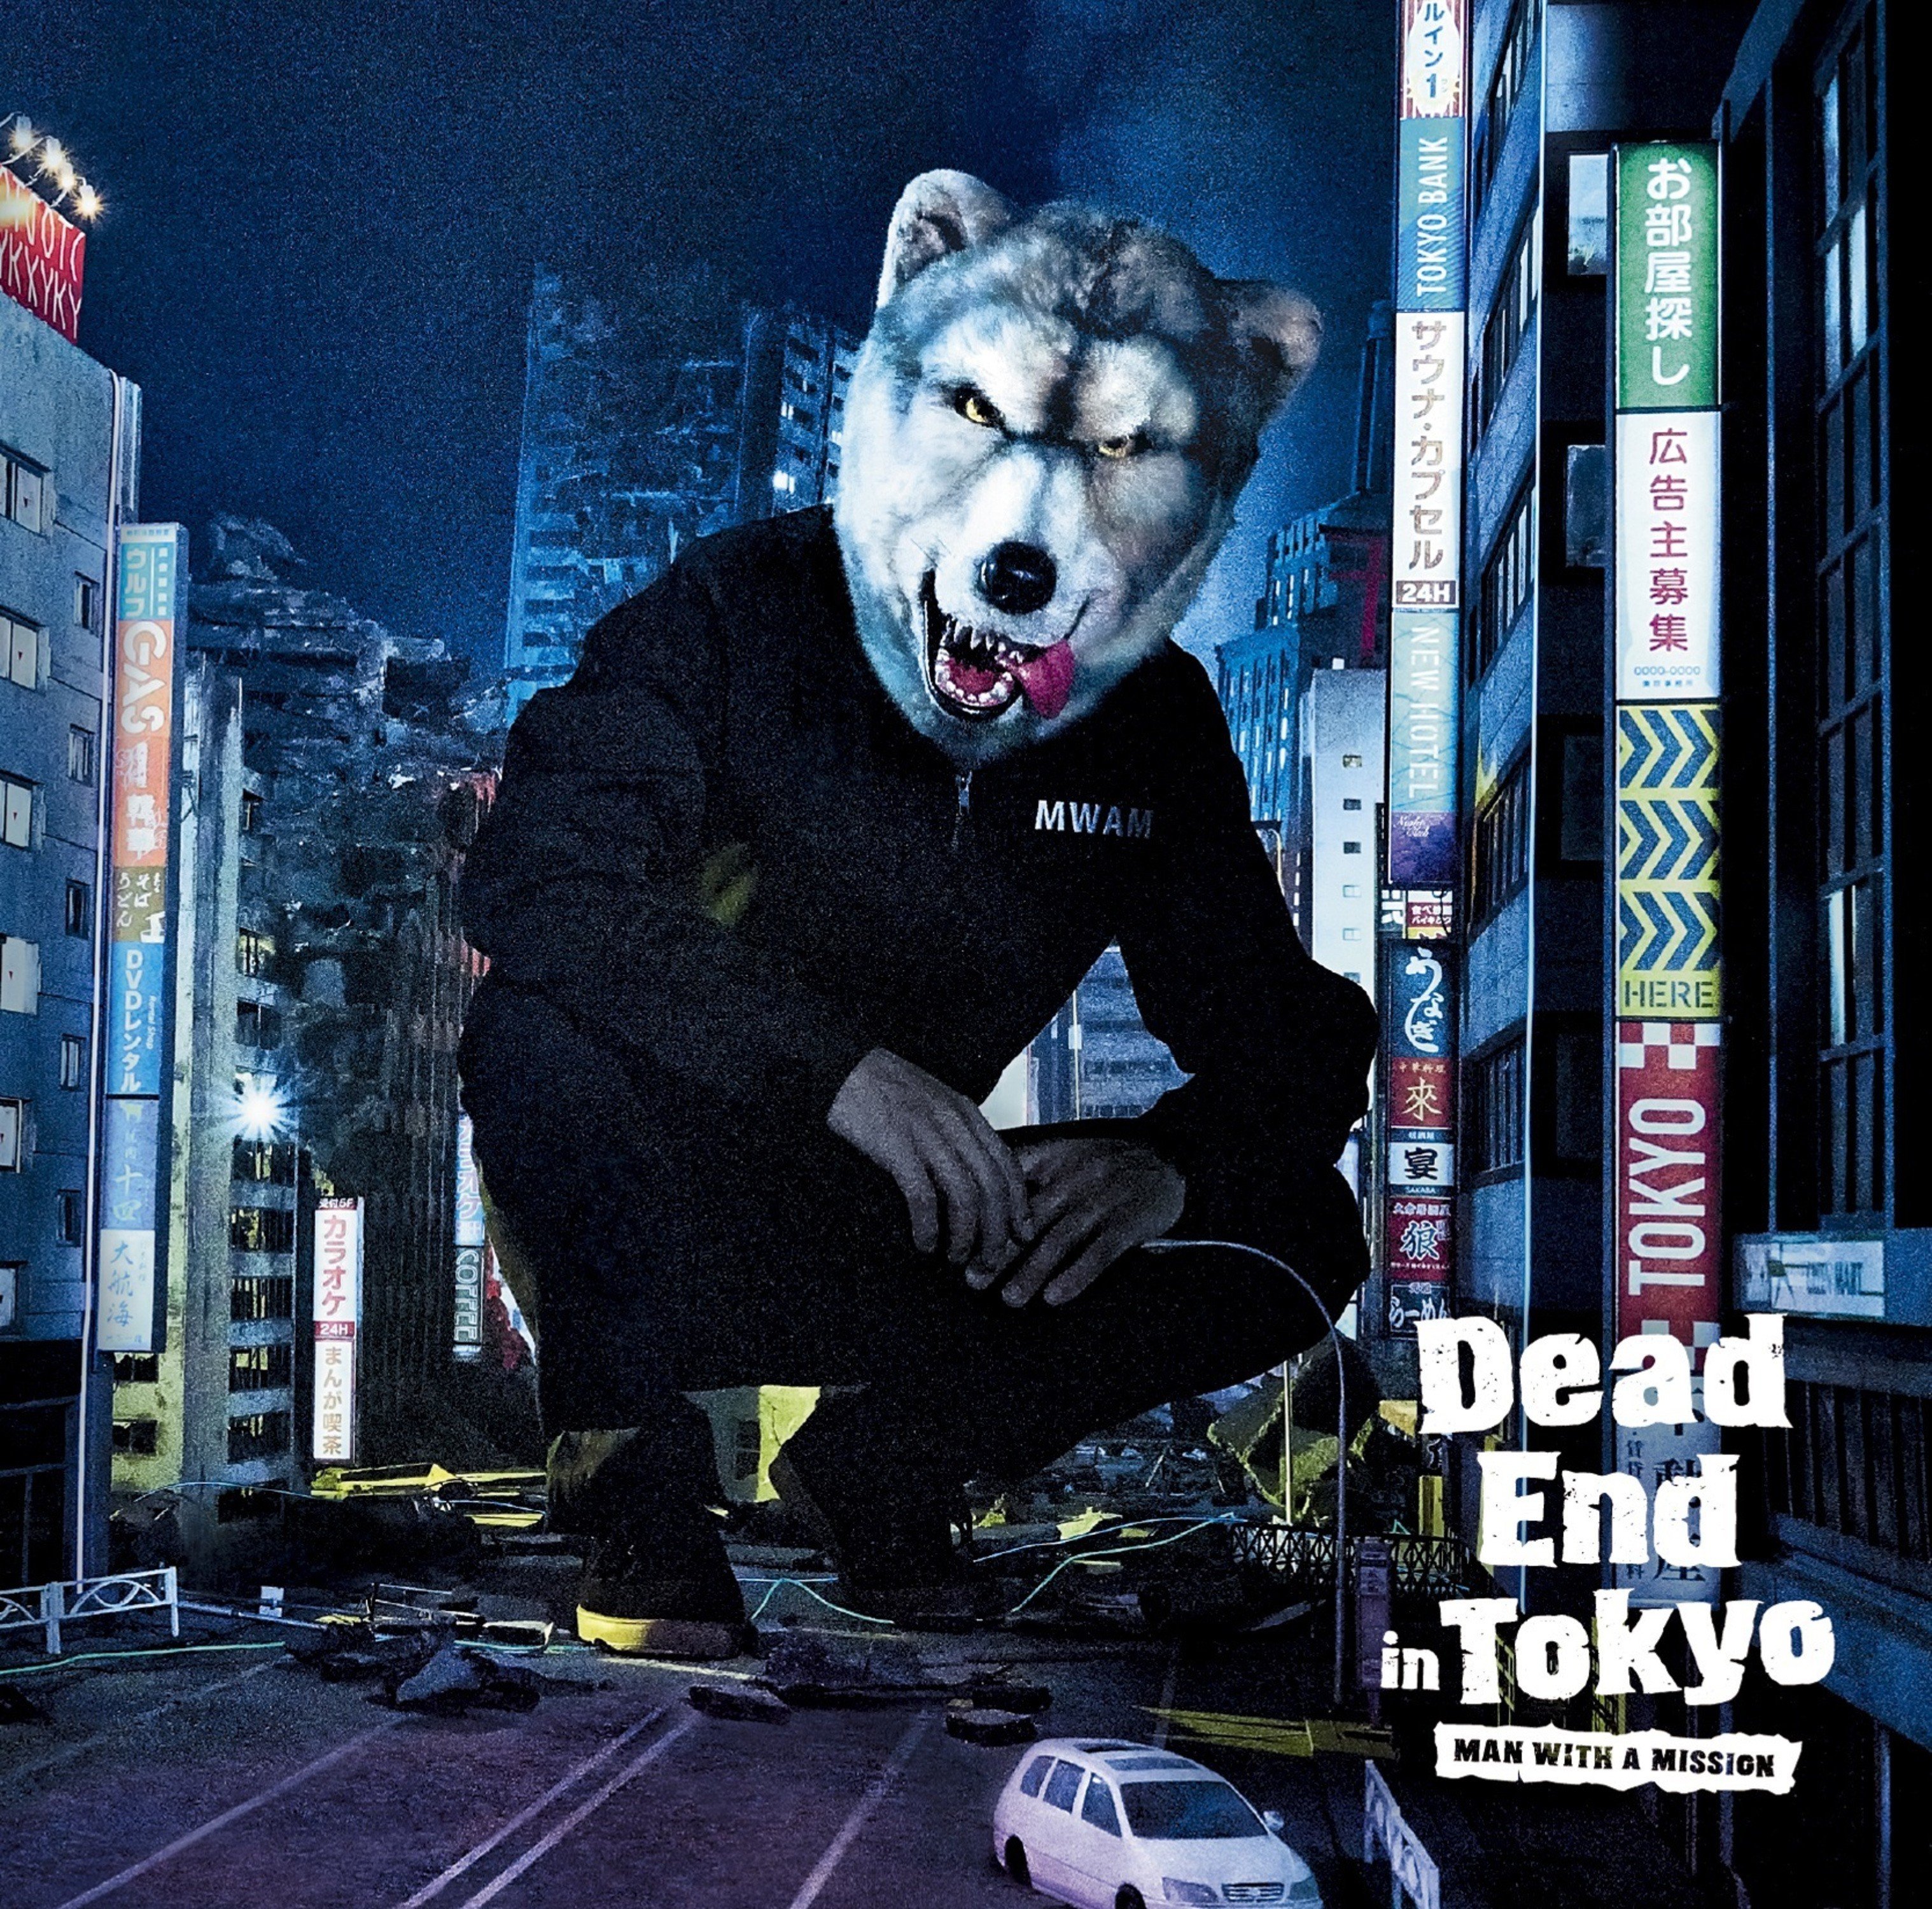 MAN WITH A MISSION – Dead End in Tokyo [FLAC / 24bit Lossless / WEB] [2017.01.25]